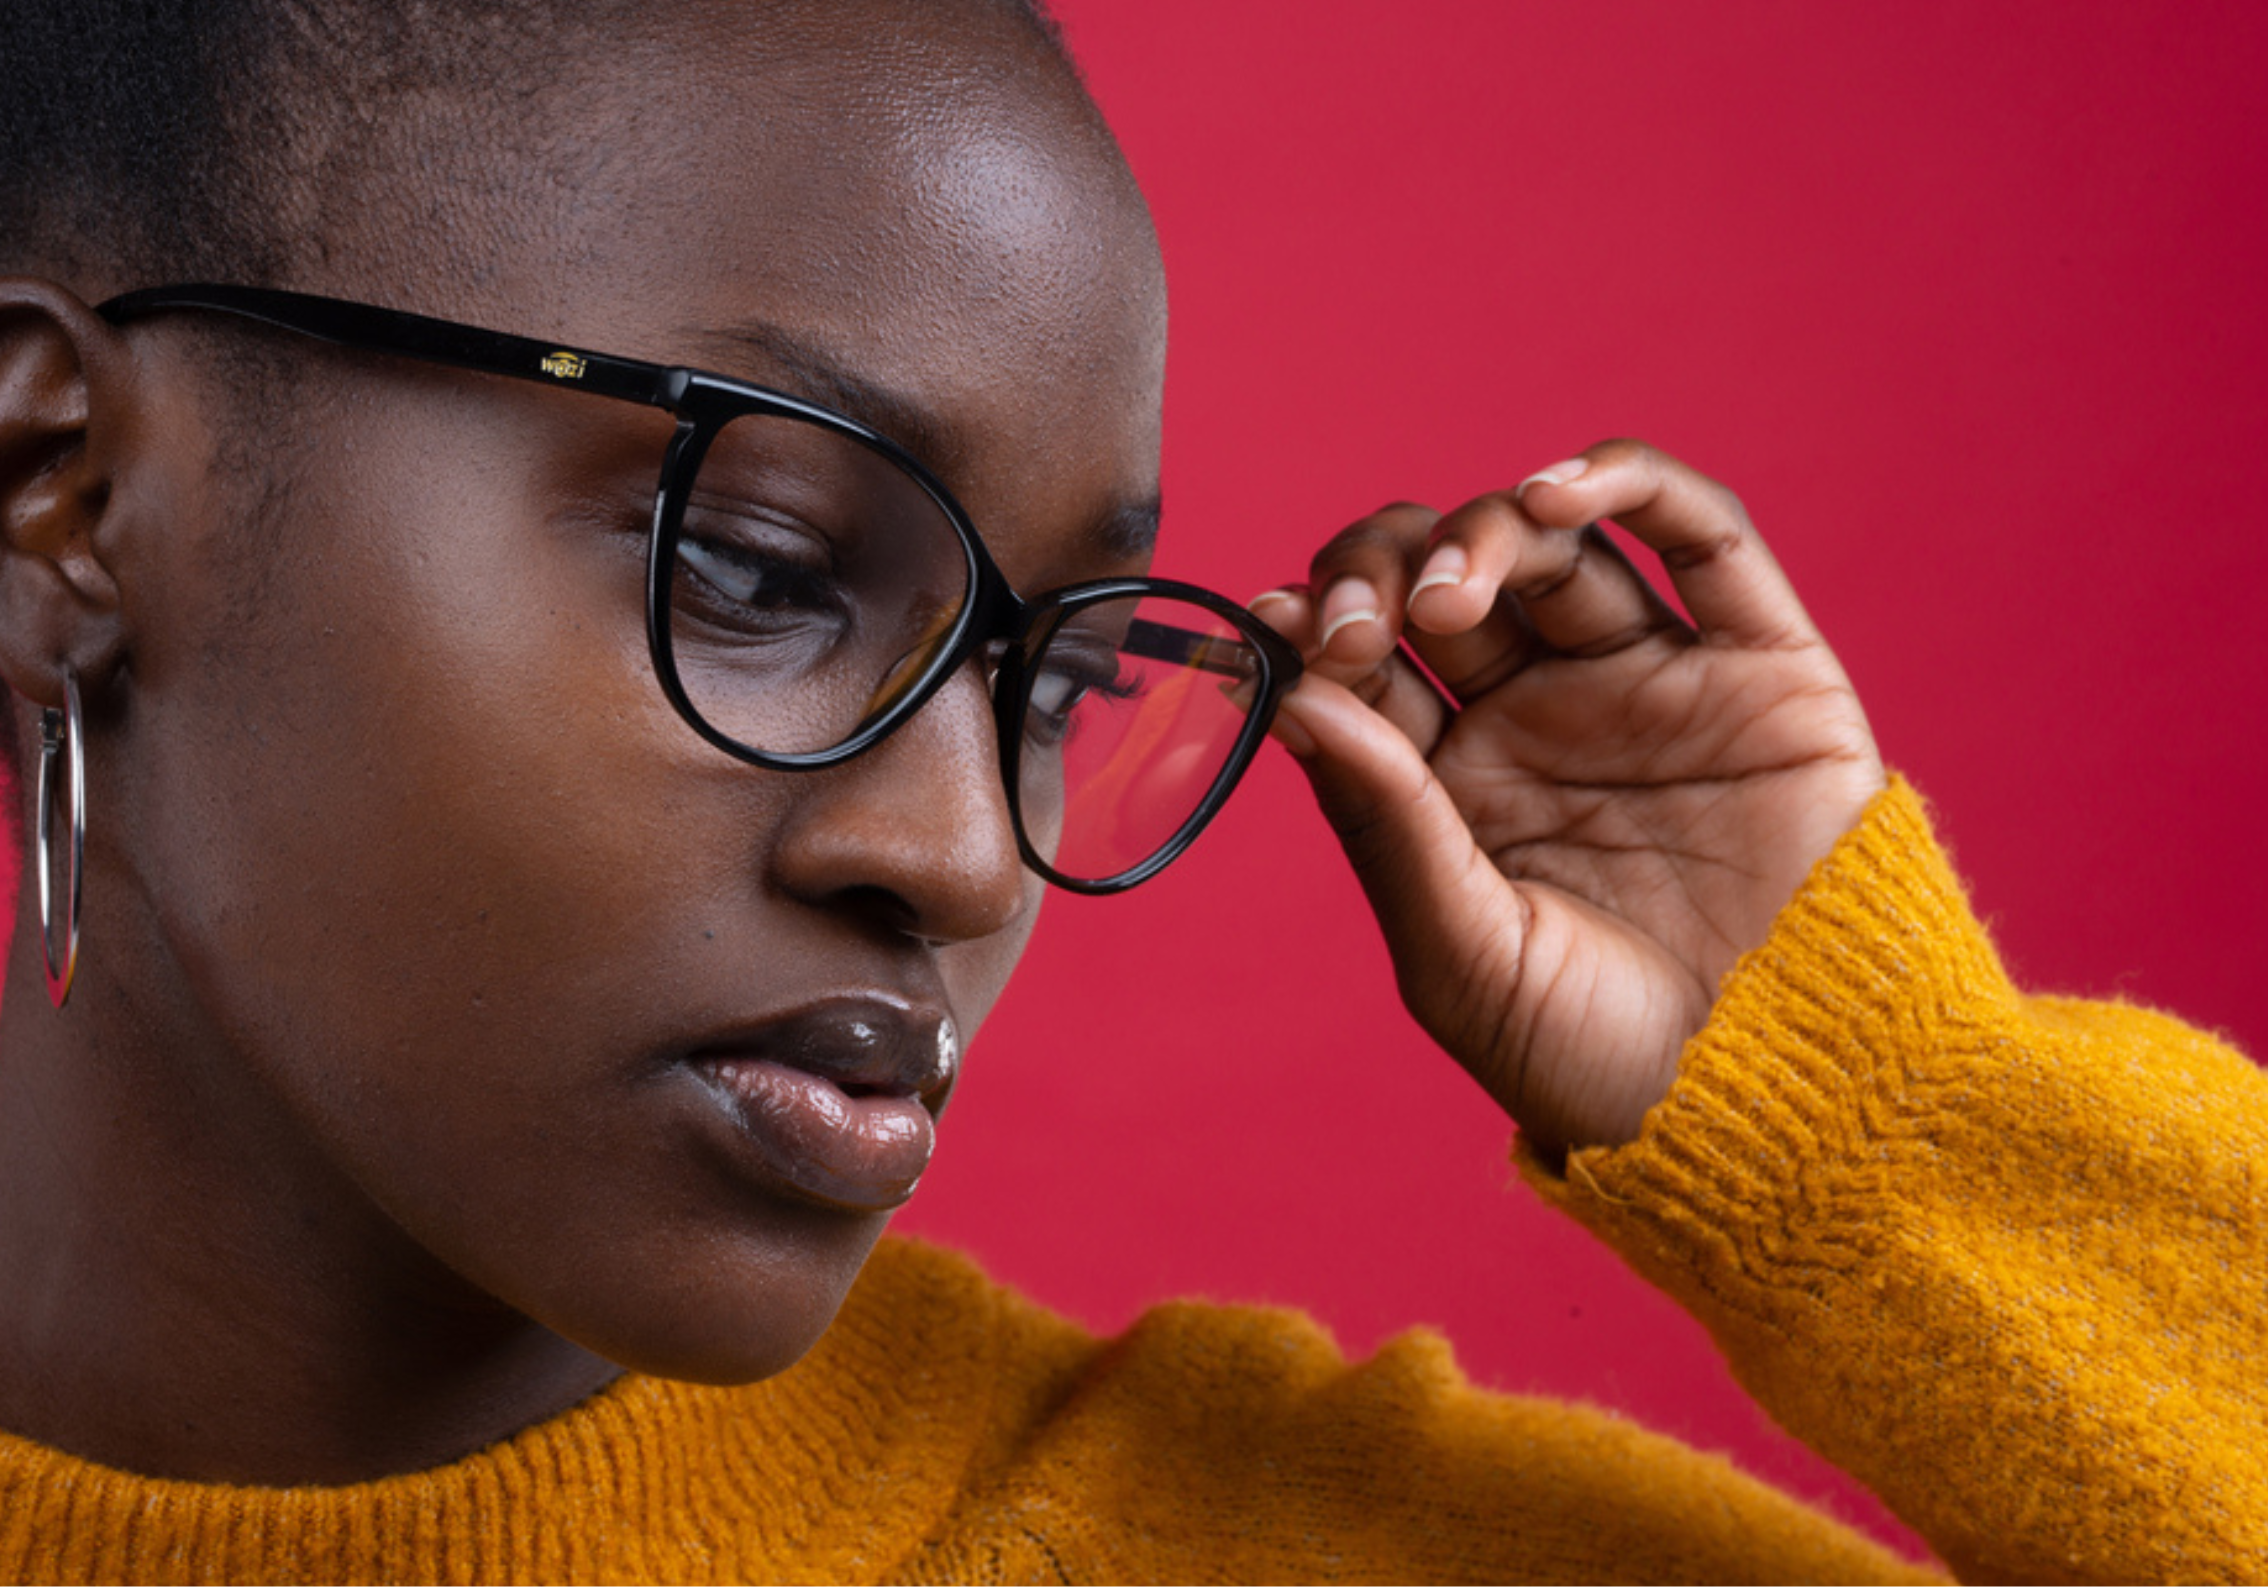 Professional photograph of a woman posing with stylish glasses. The female in the photo is black and is wearing a bright yellow jumper against a red background Cover Image